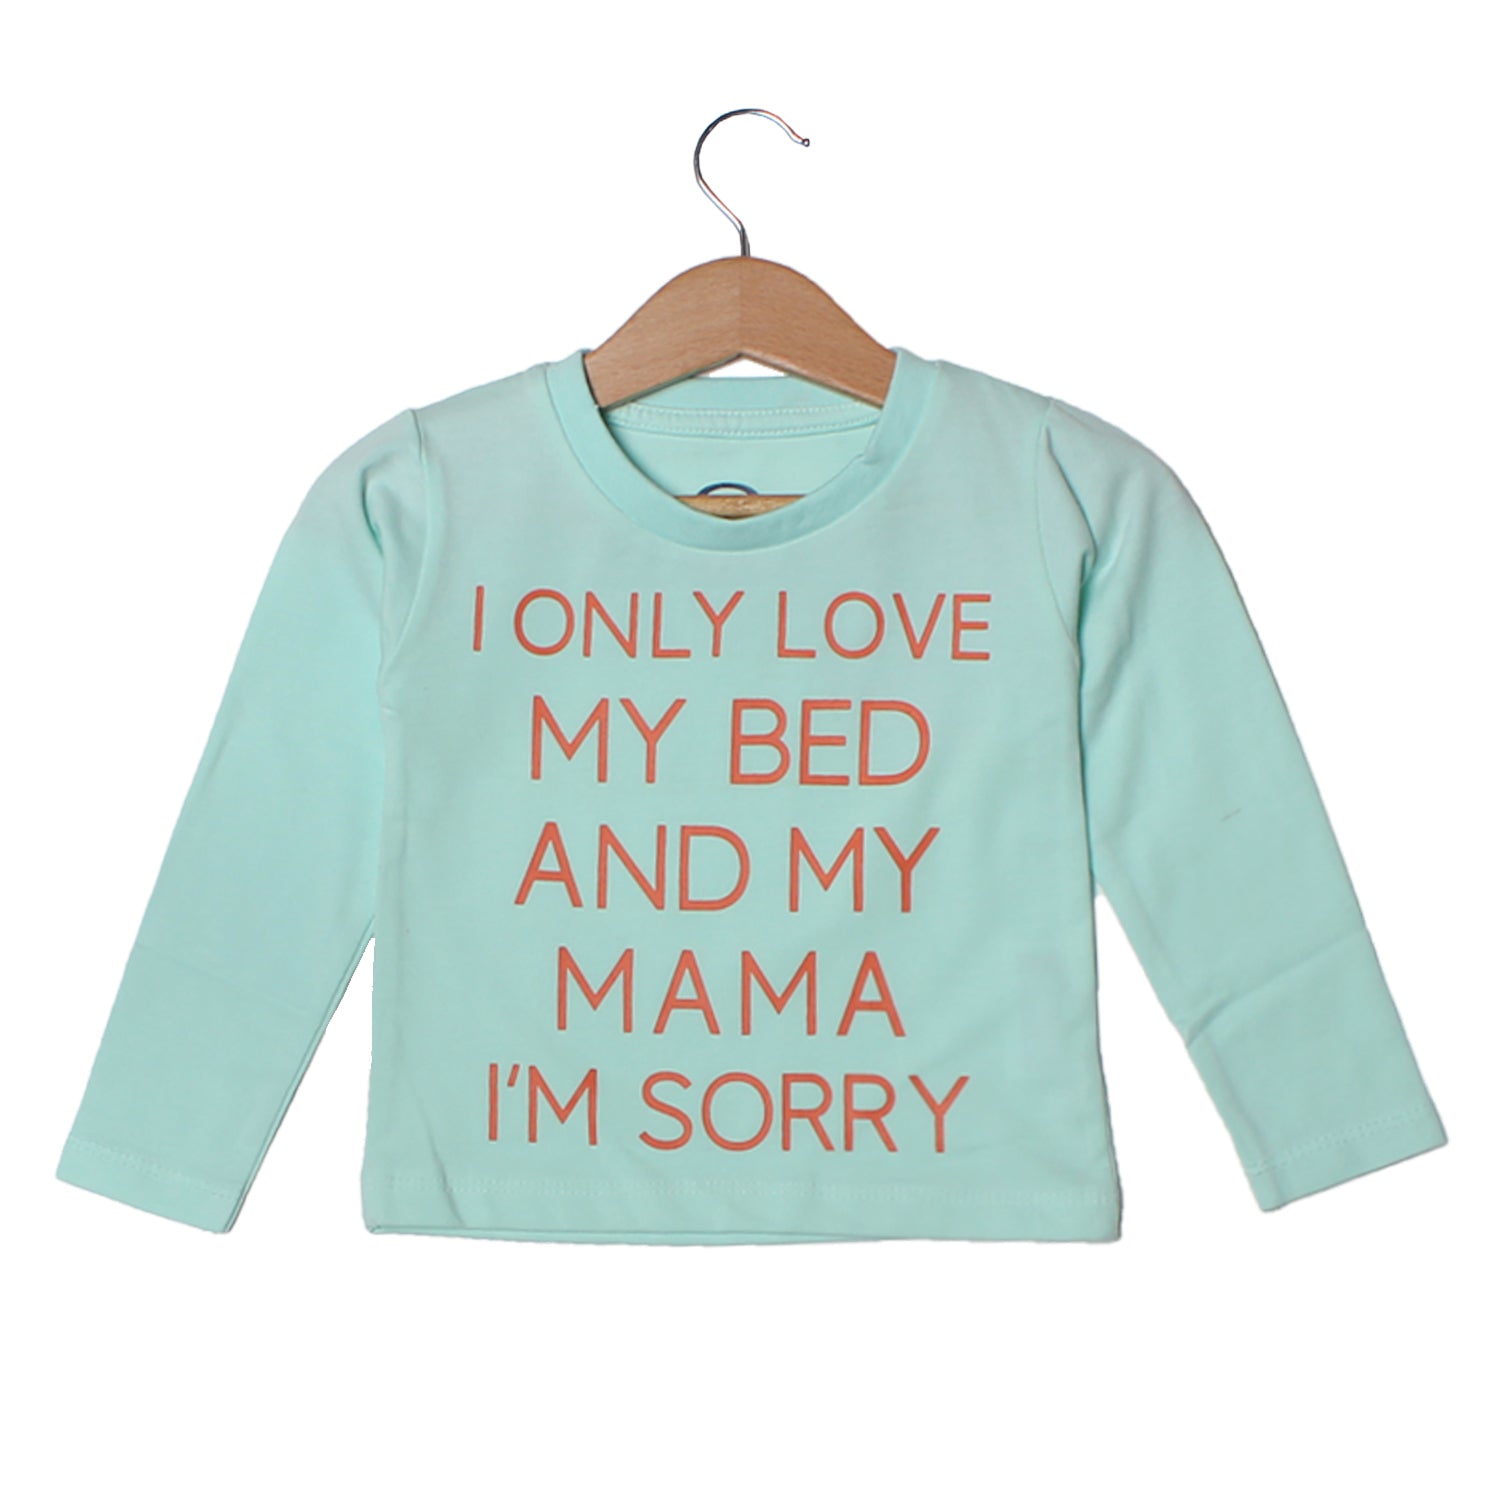 I ONLY LOVE MY BED AND MY MAMA FULL SLEEVE T-SHIRT